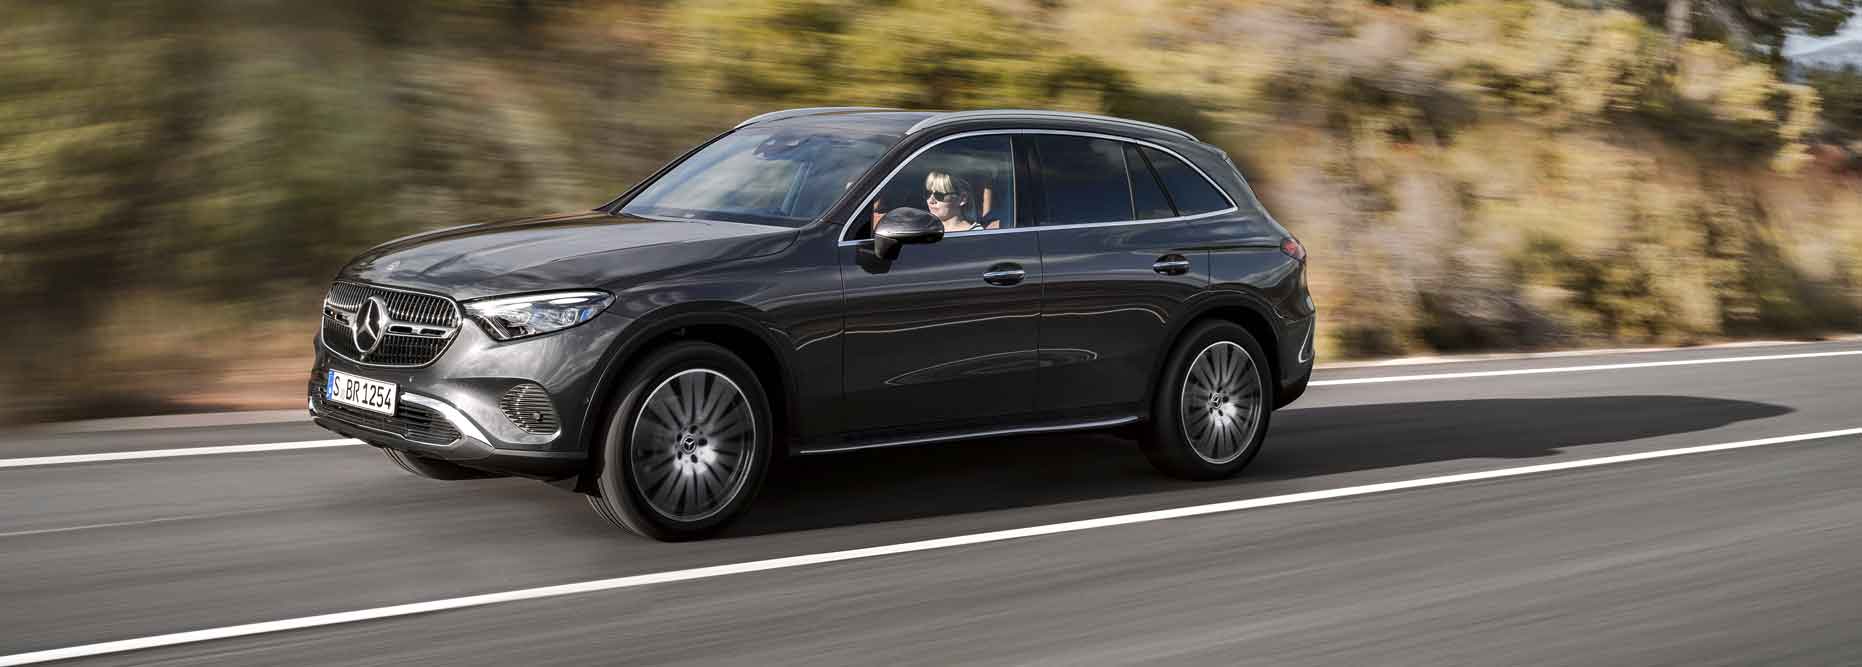 Mercedes-Benz launches all-new GLC